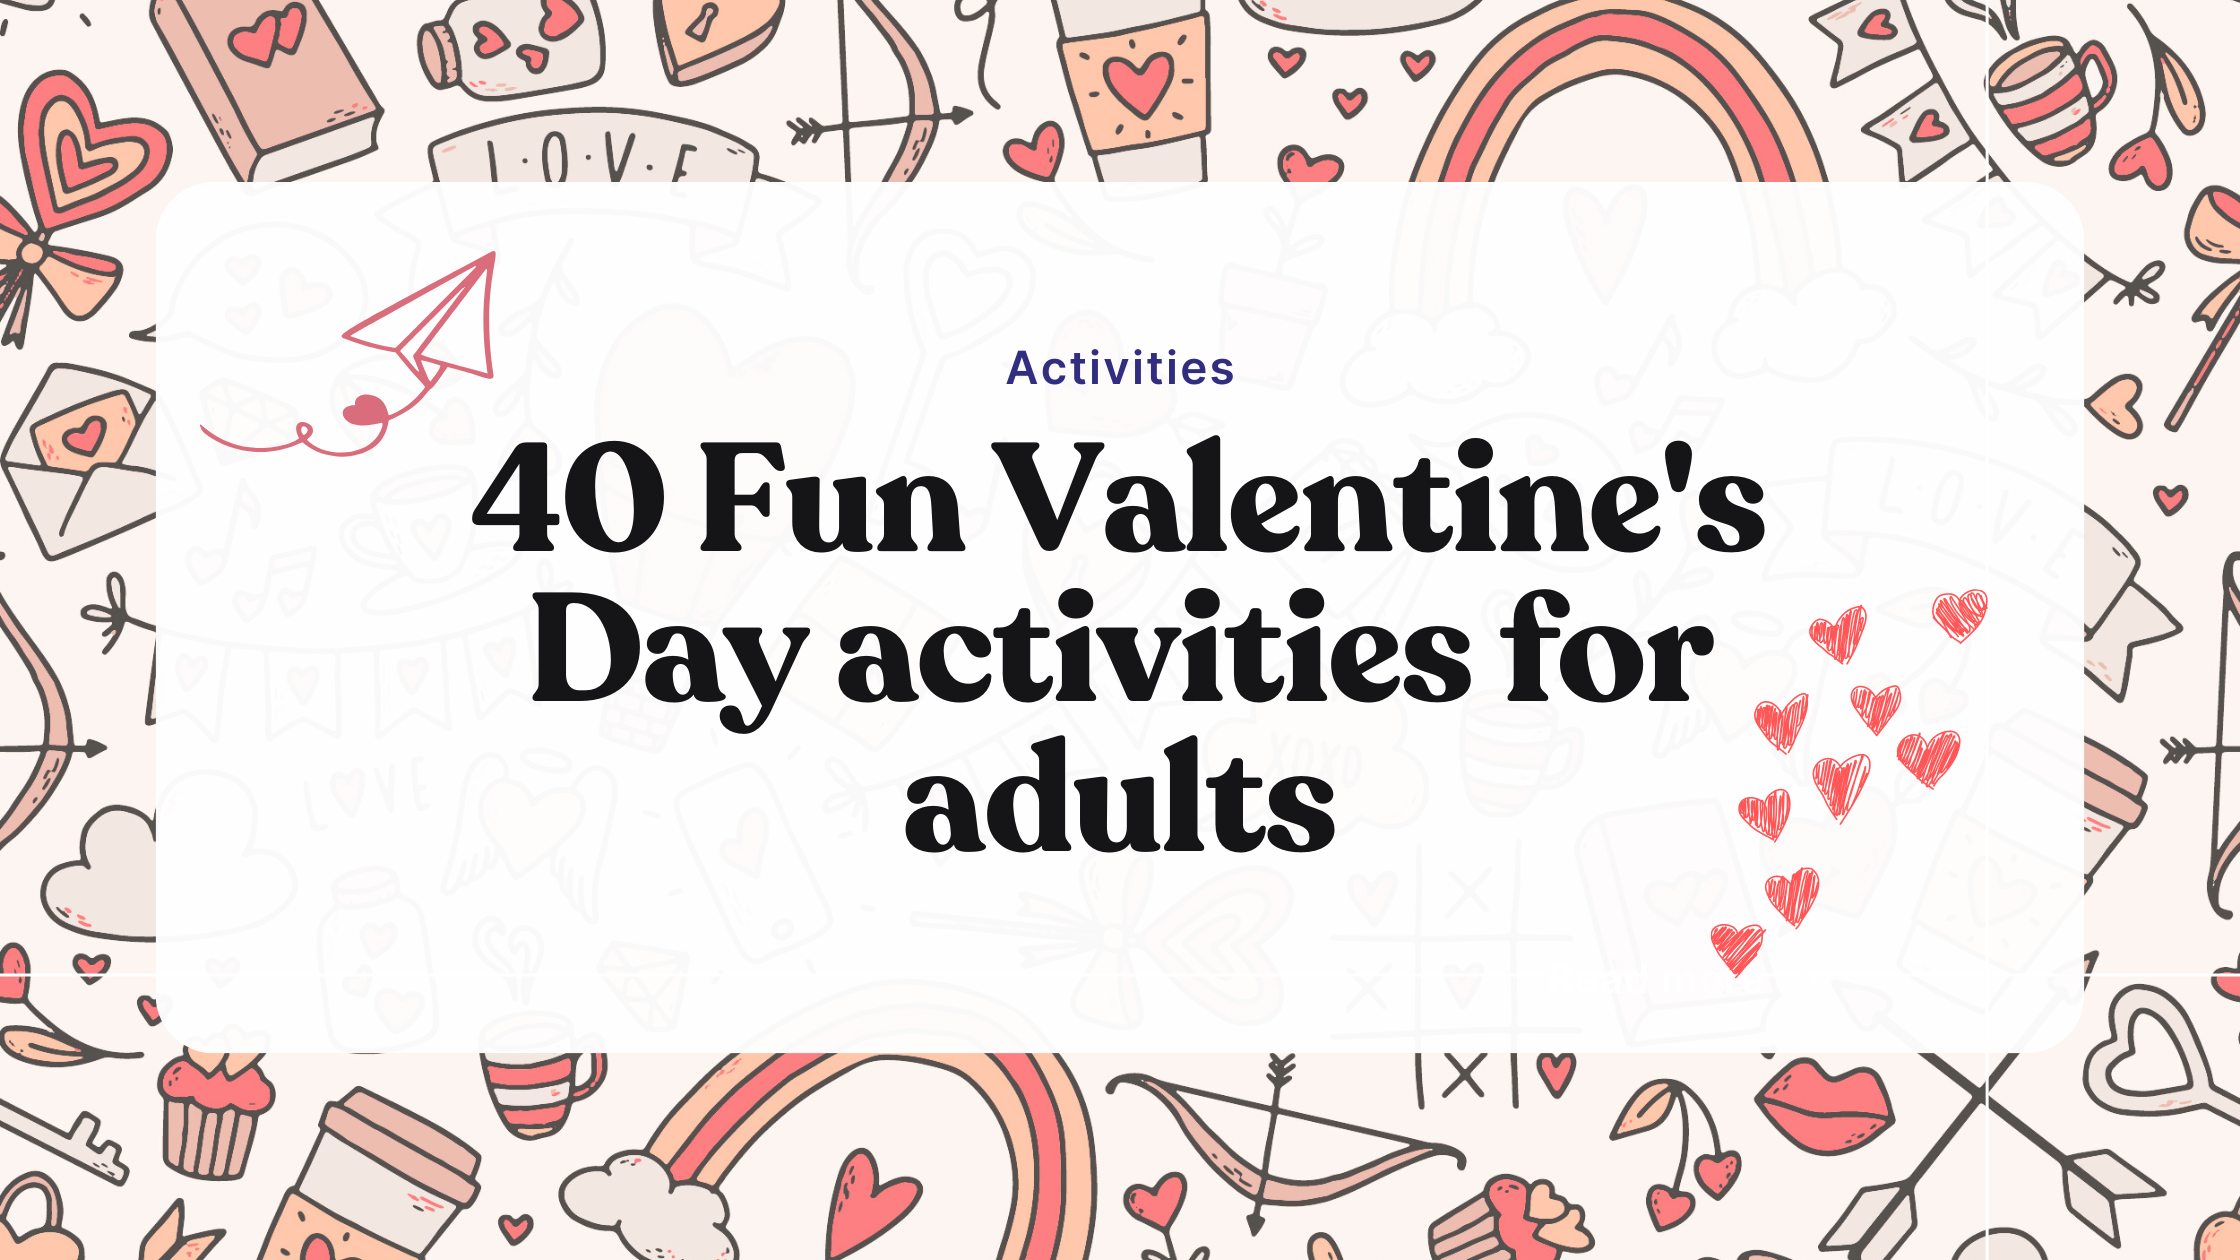 40 fun Valentine’s Day activities for adults